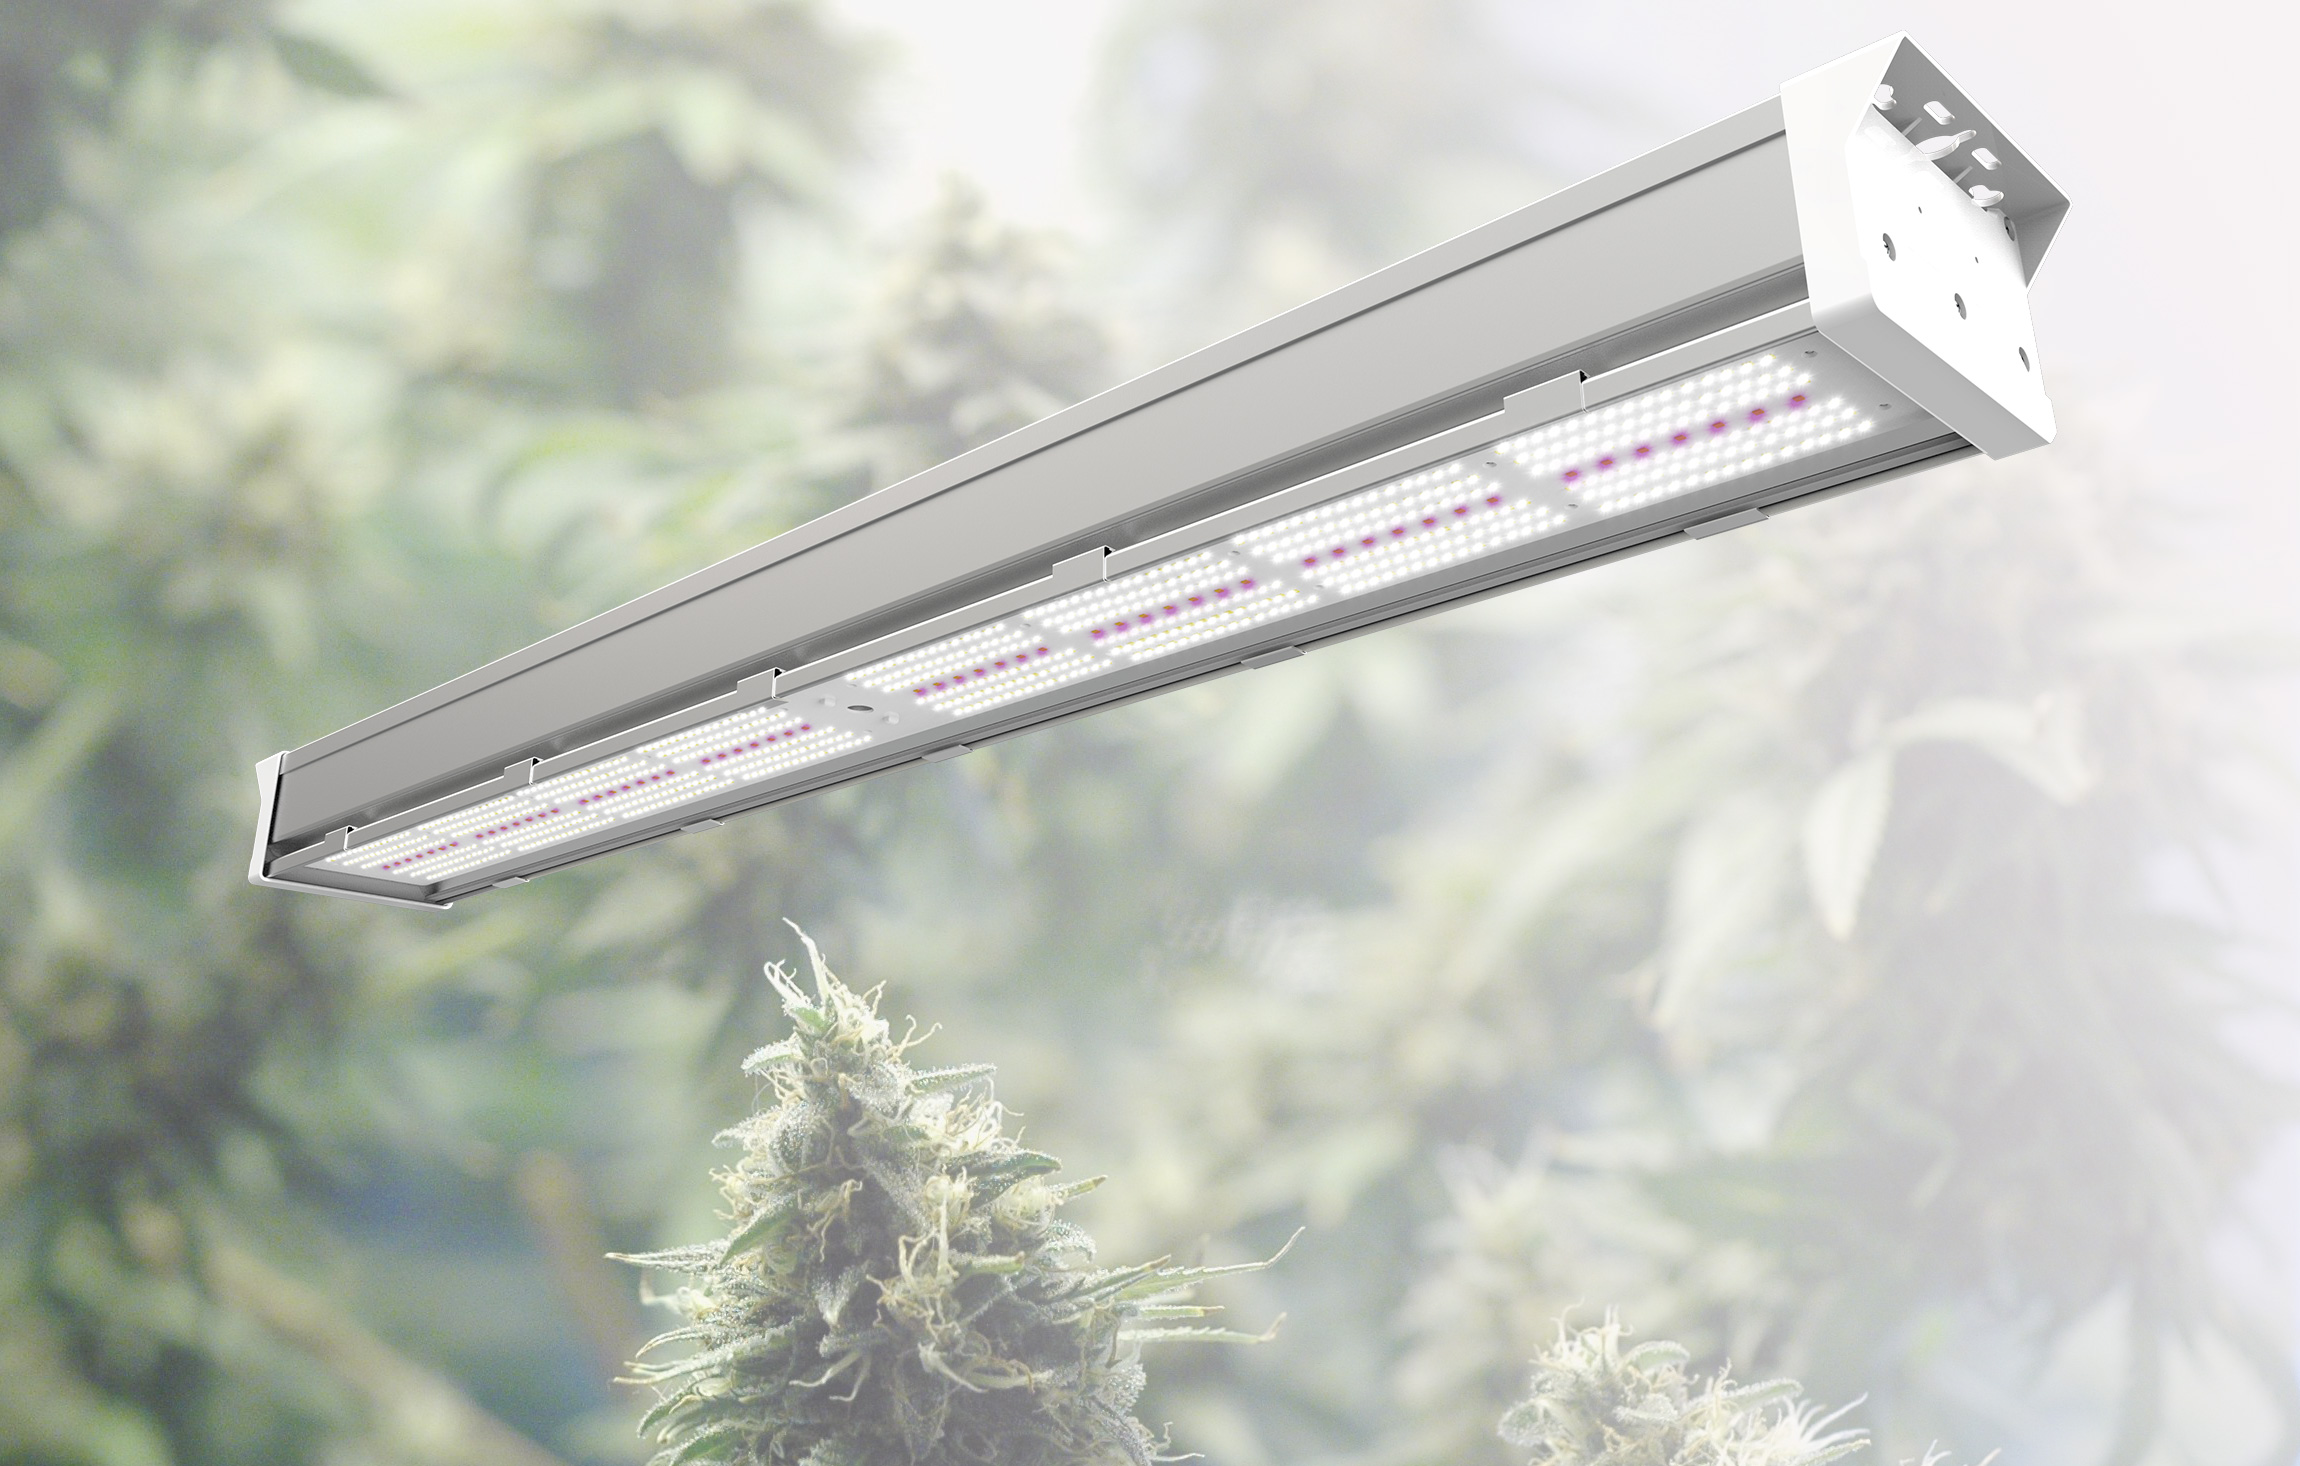 The Most Comprehensive Information about The Effect of All Kinds of Colour Light On Plants-Atop LED Grow Light